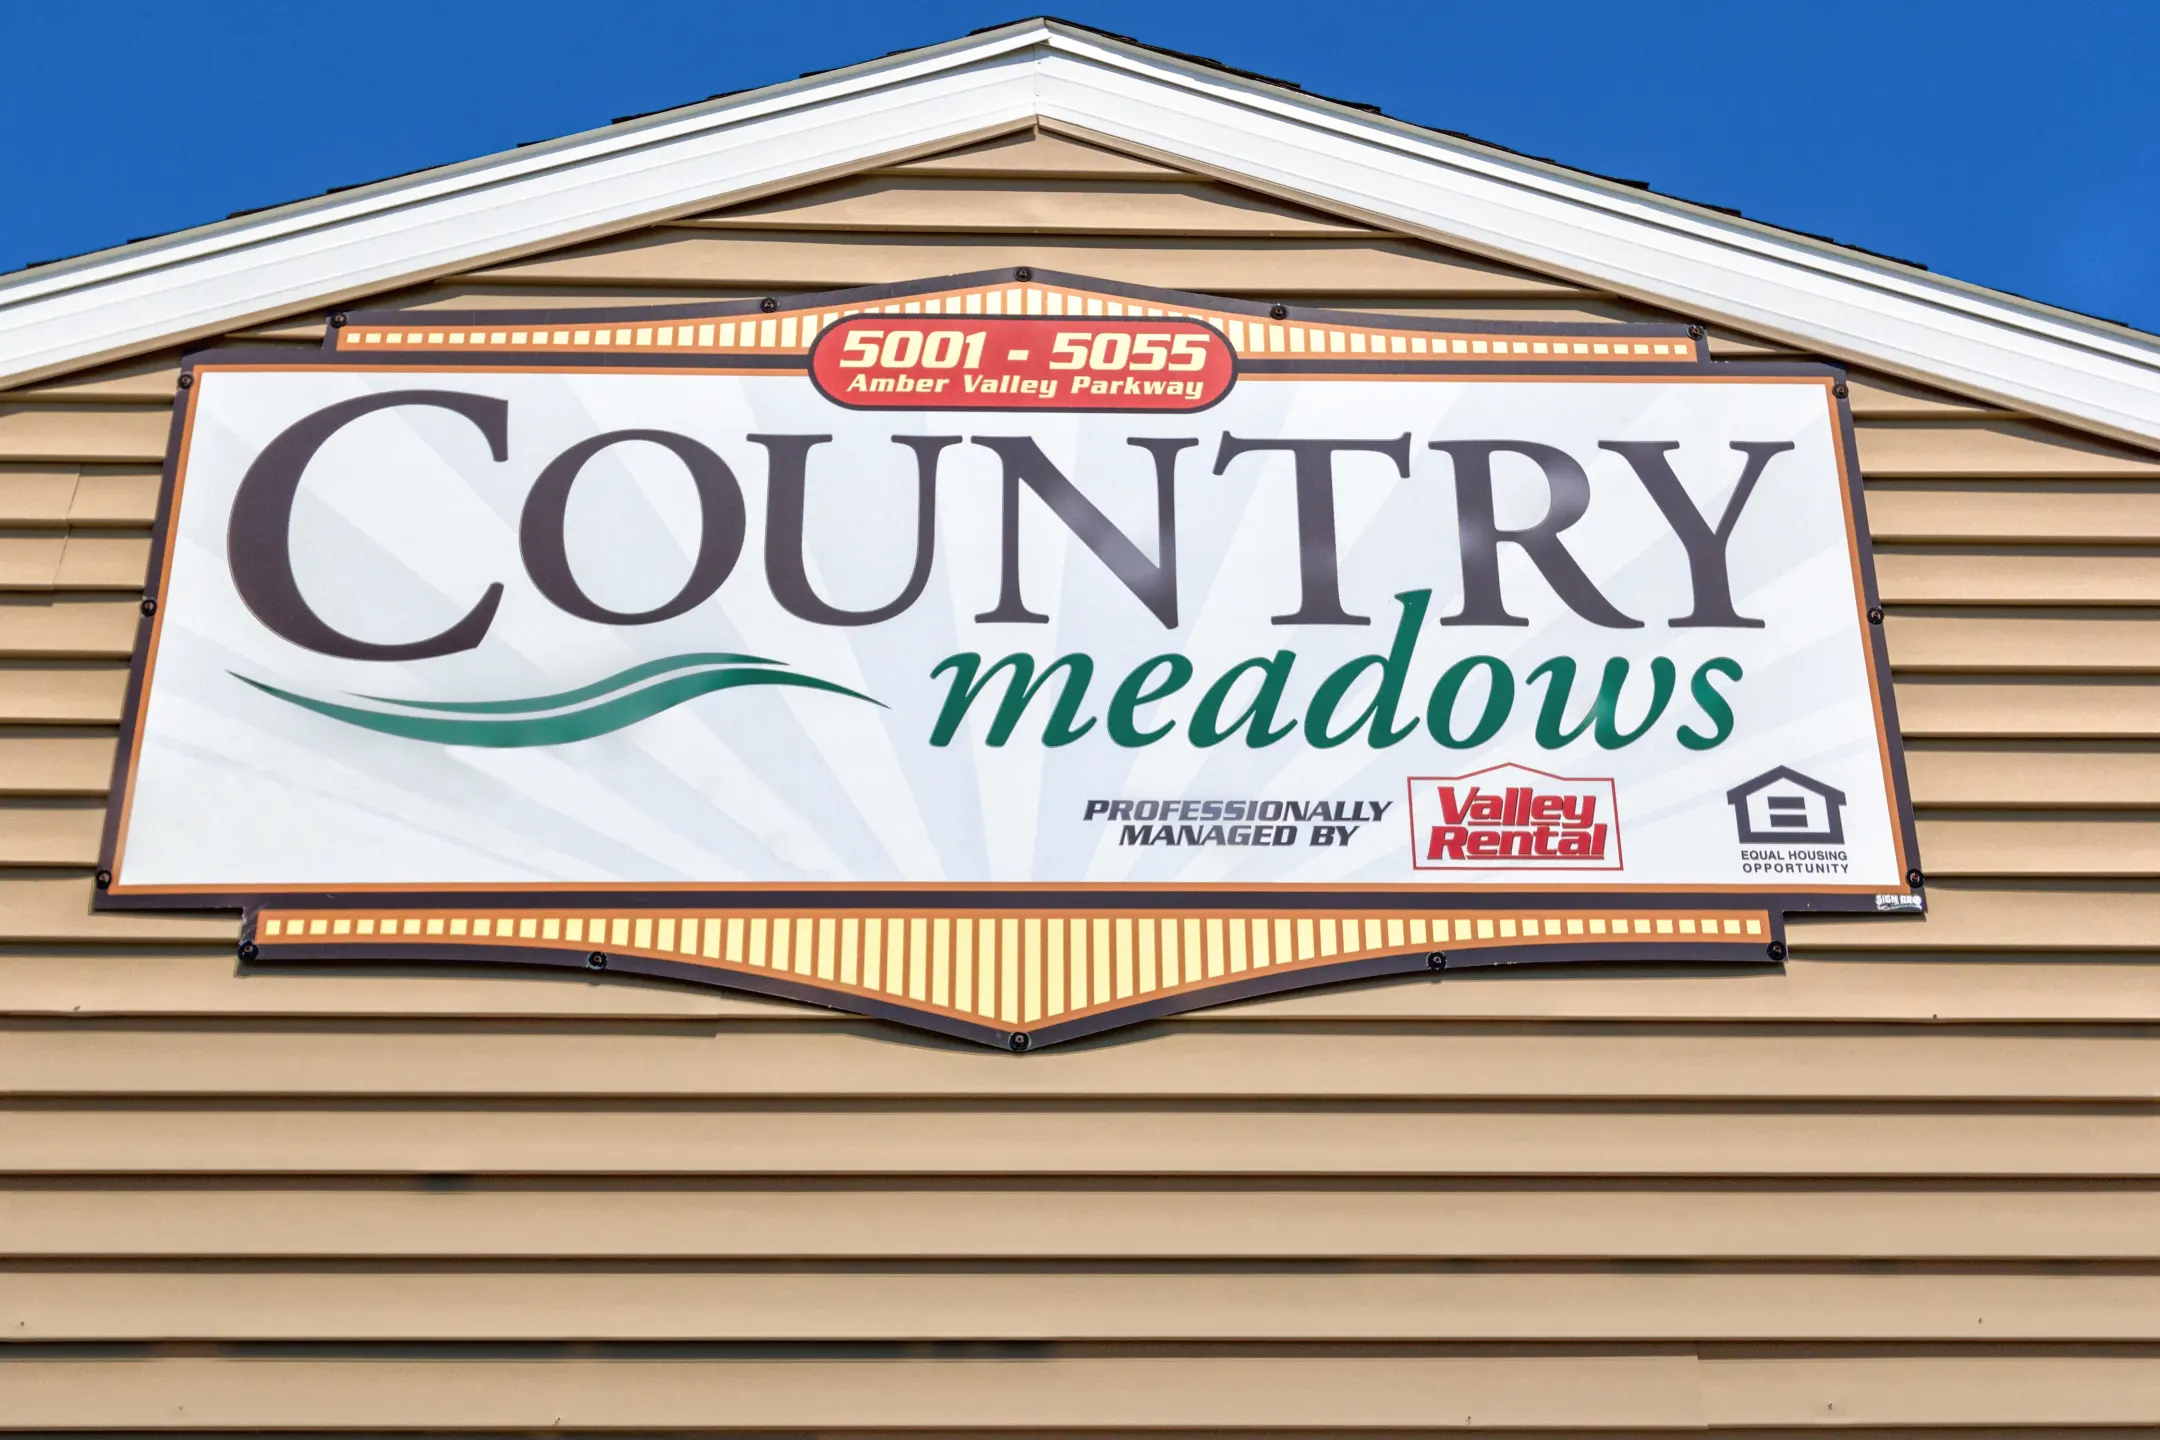 Community Signage - Country Meadows - Fargo, ND